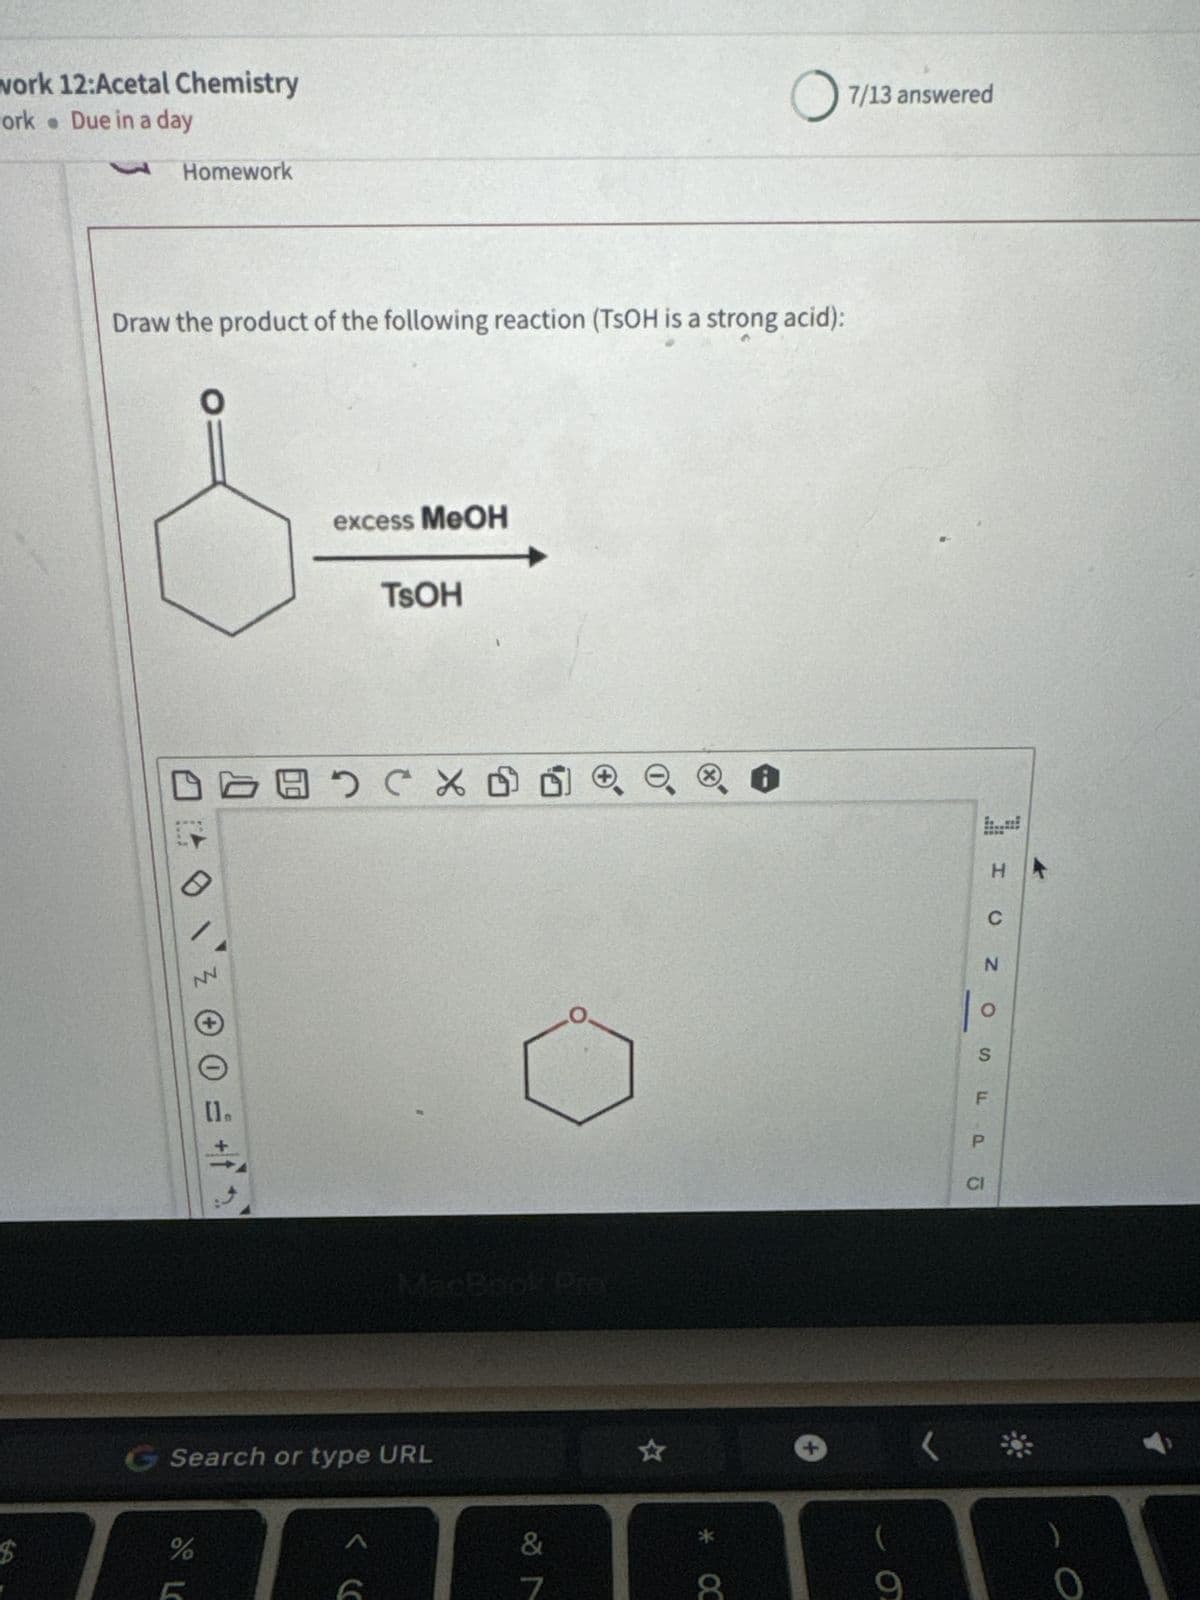 work 12:Acetal Chemistry
work Due in a day
Homework
○ 7/13 answered
Draw the product of the following reaction (TSOH is a strong acid):
O
excess MeOH
TSOH
N
$
=
+
(×
MacBook Prev
G Search or type URL
ле
%
<C
&
27
H
CNOS
1°
ос
+
F
Pō
CI
σ